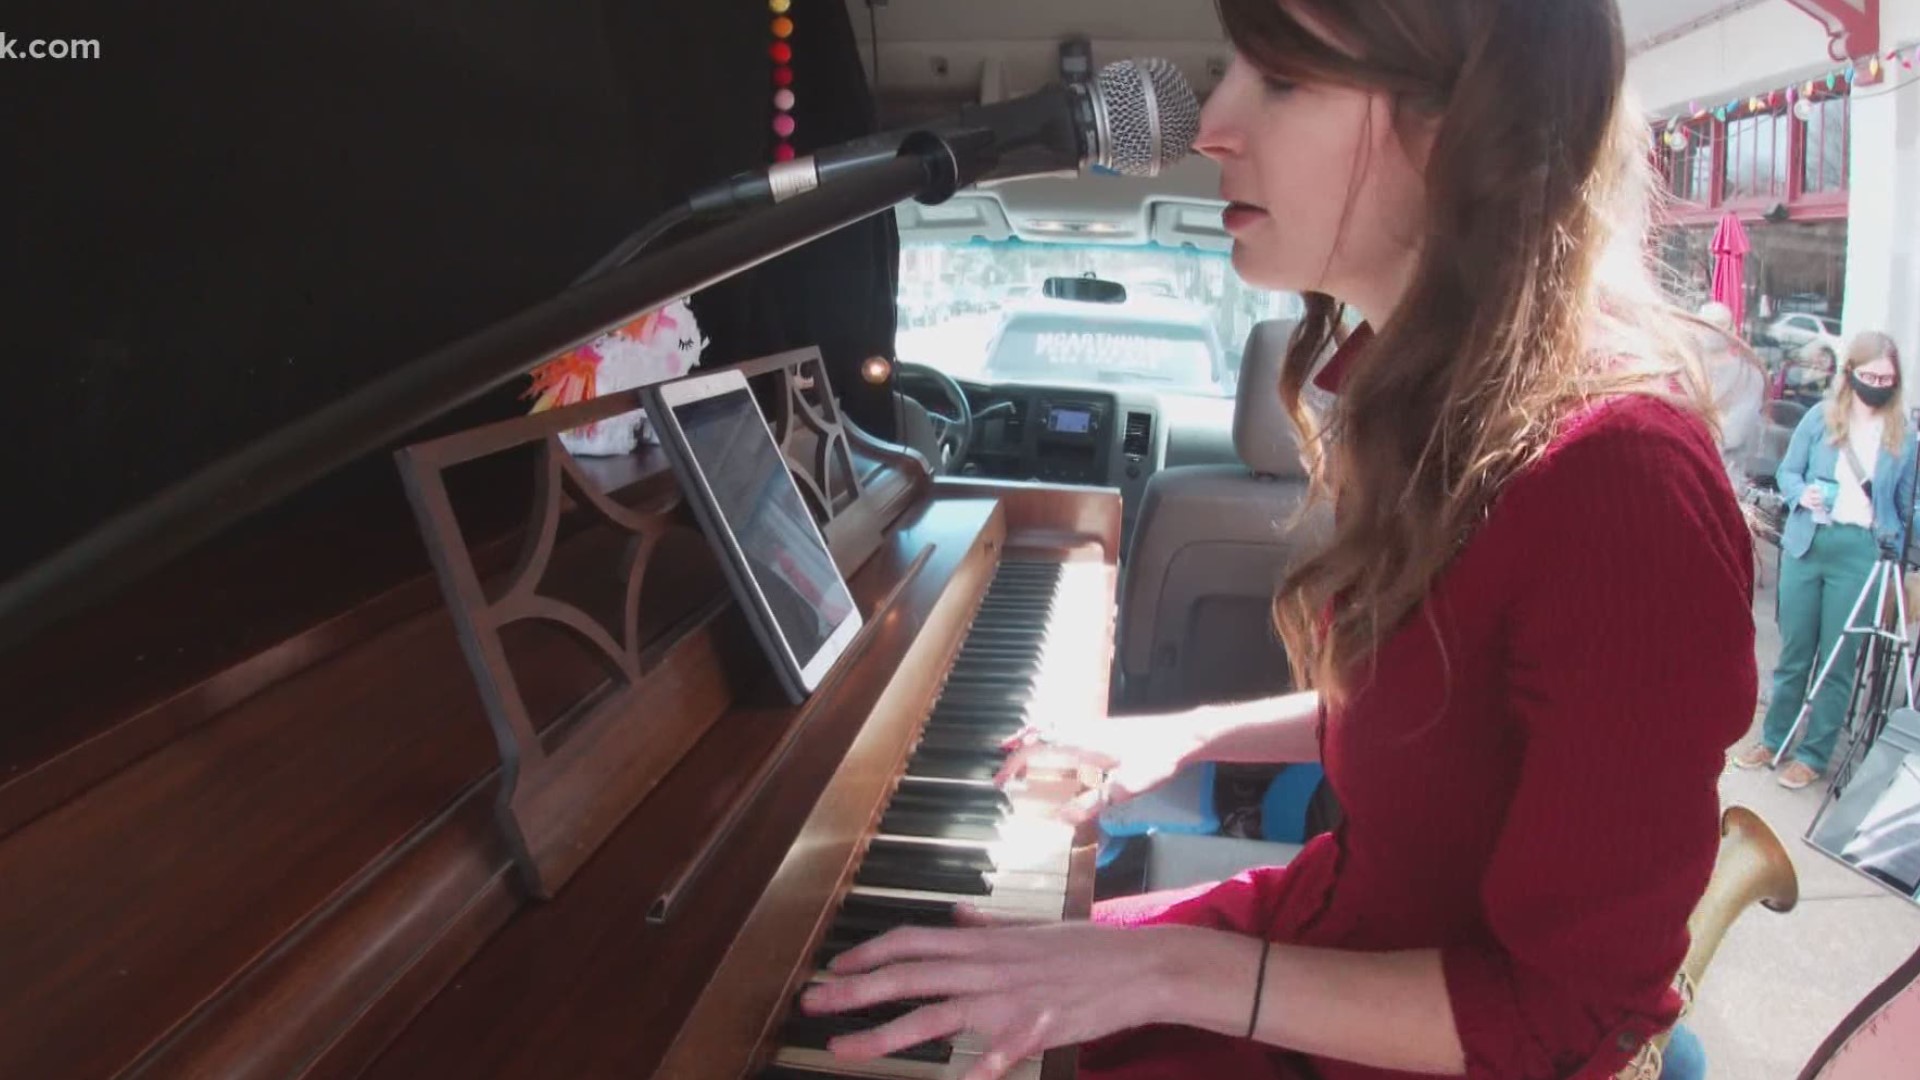 People are finding ways to help one another get through the pandemic. Jackson Pianos is taking its show on the road, raising money and lifting spirits through music